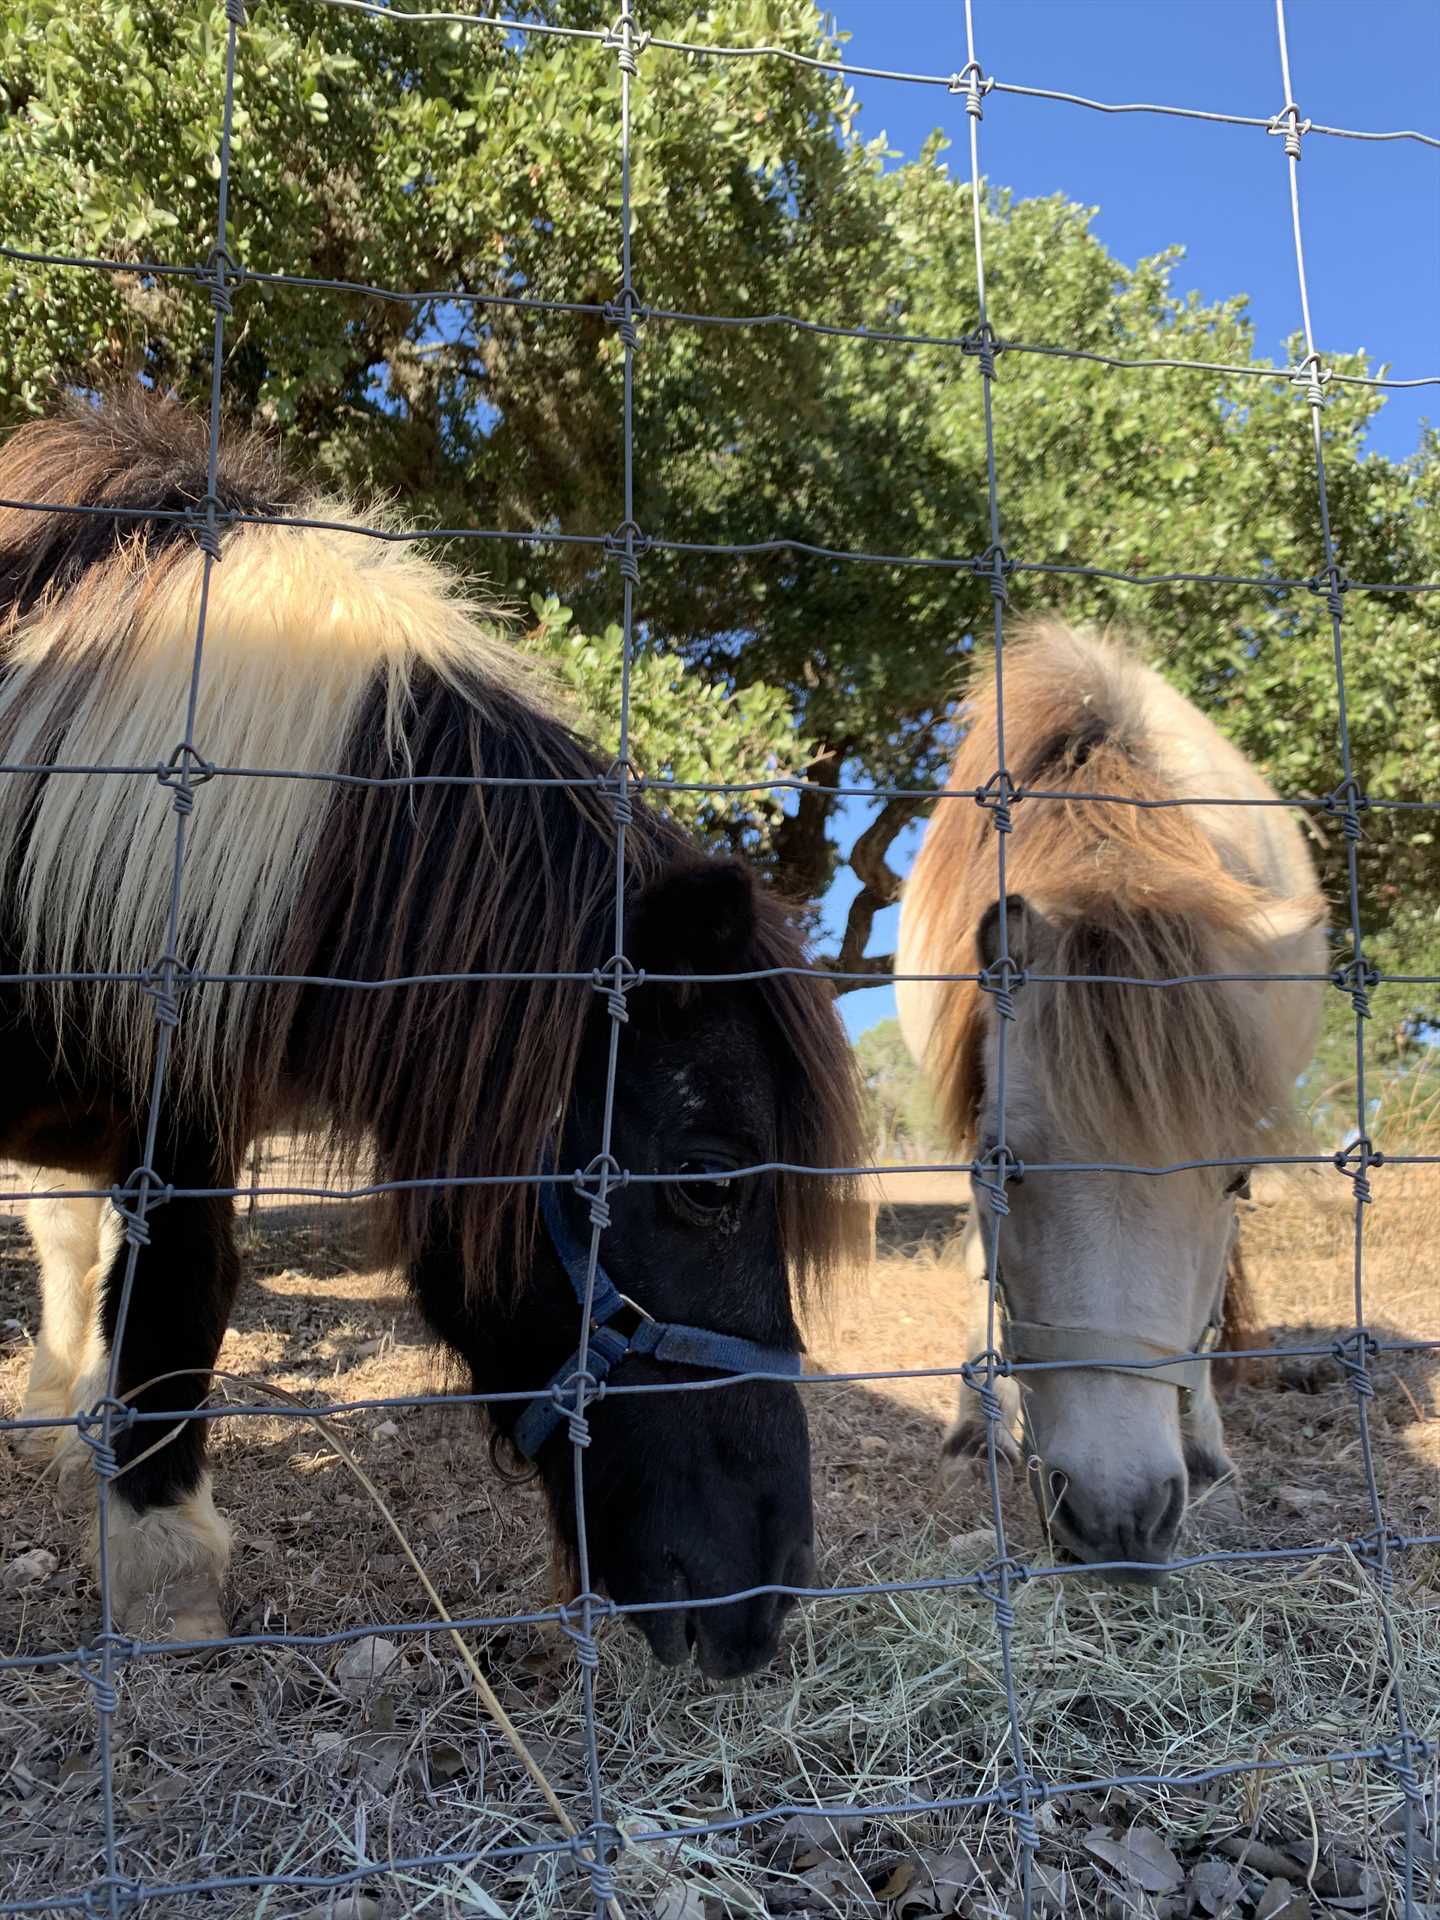                                                 Buttercup and Jelly Bean are the photogenic miniature horses at Tabasco Ranch.